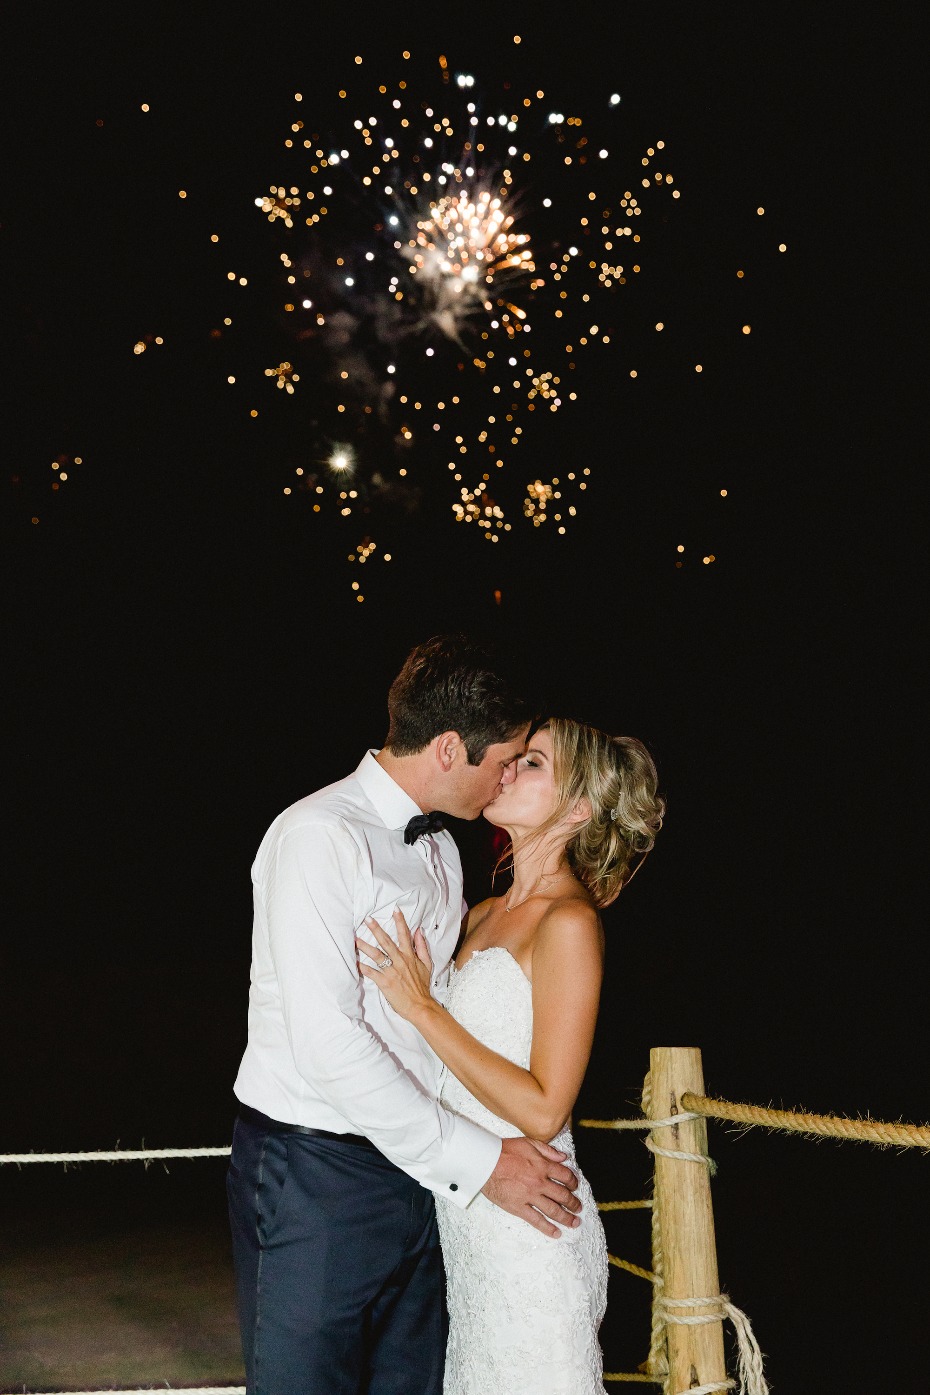 Fireworks for the newlyweds